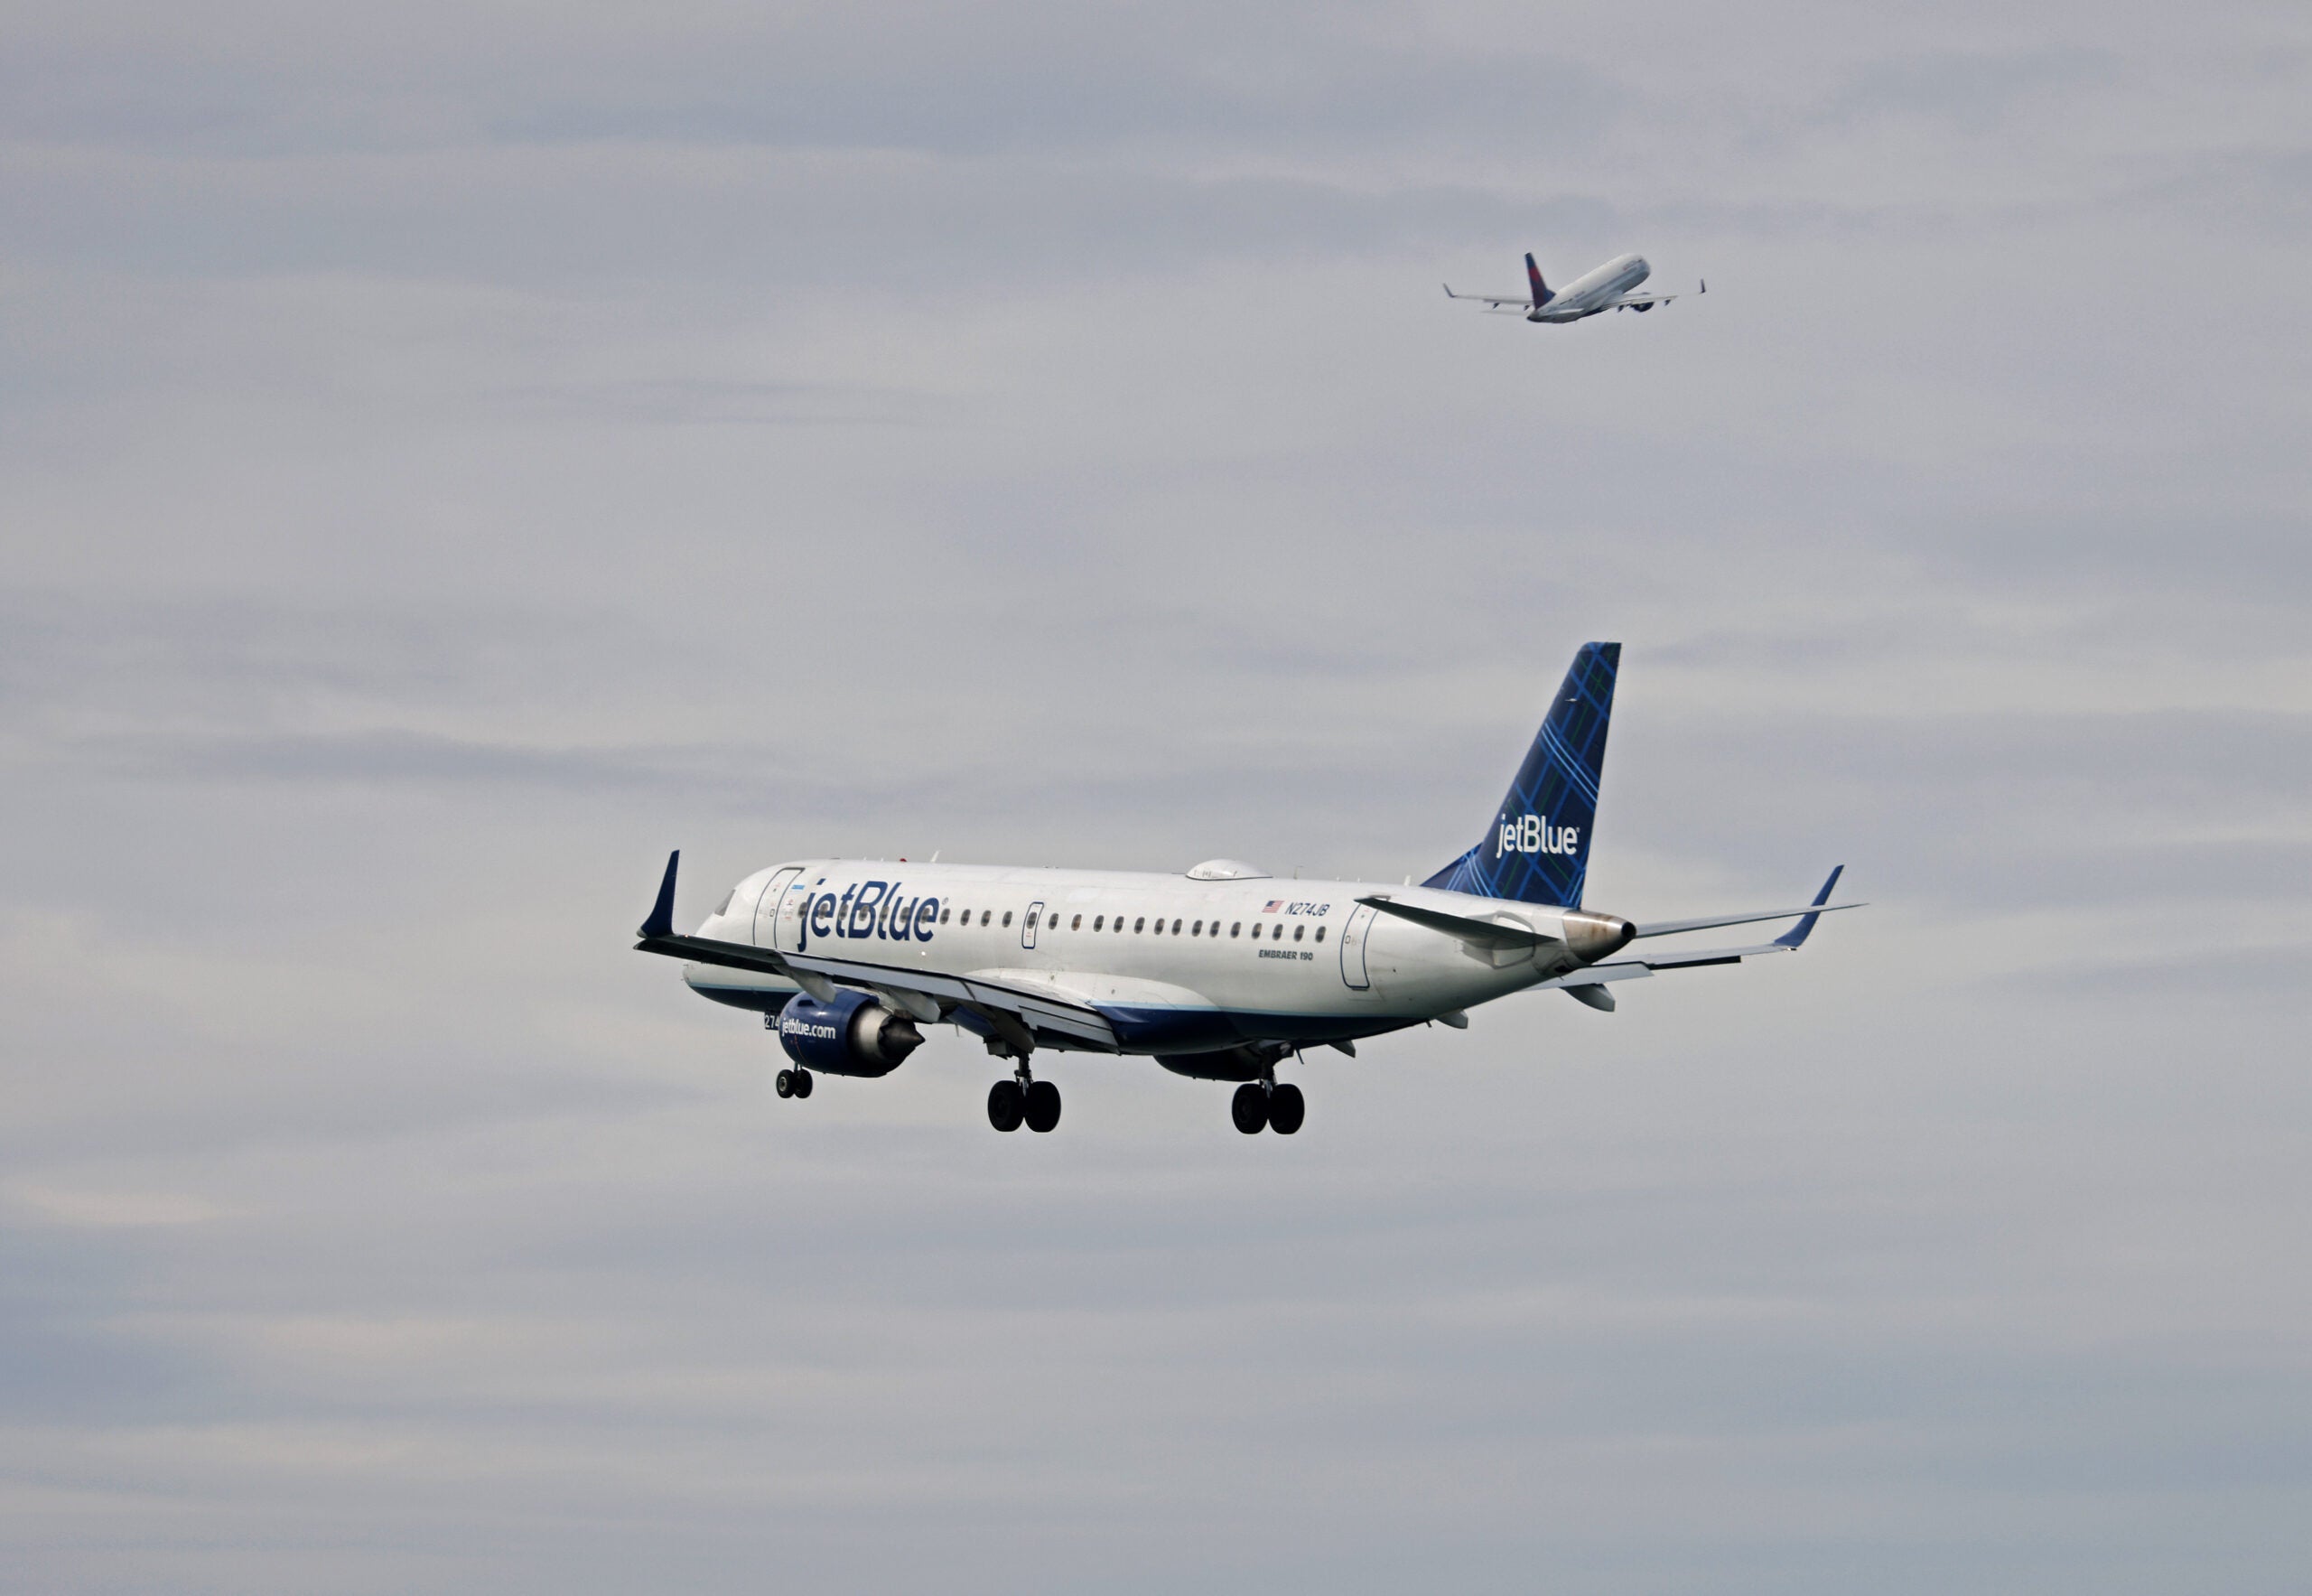 A JetBlue plane is seen flying in the sky, with another plane flying in the distance.